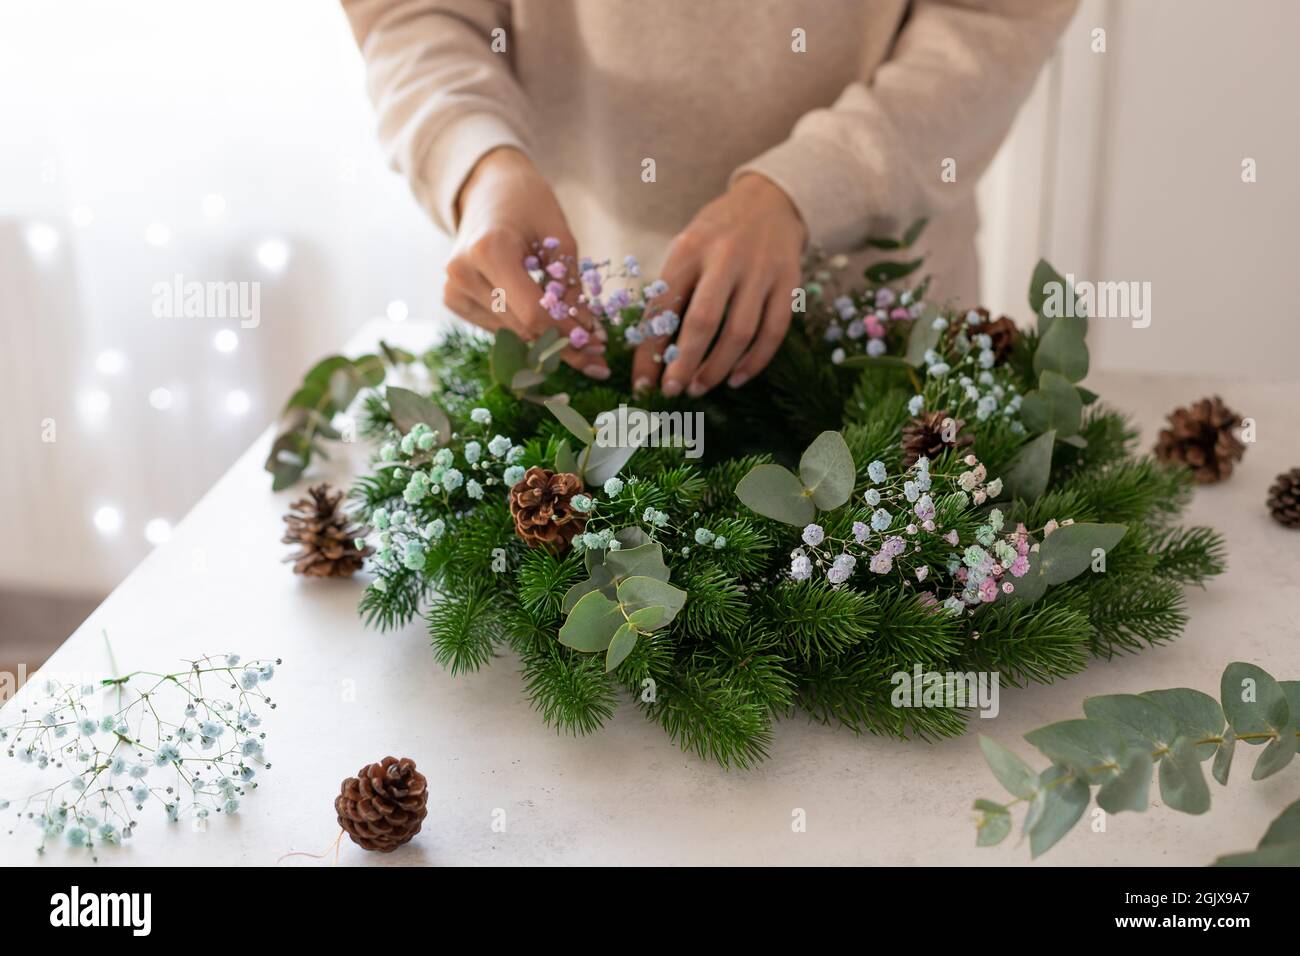 person hands making Christmas wreath Stock Photo